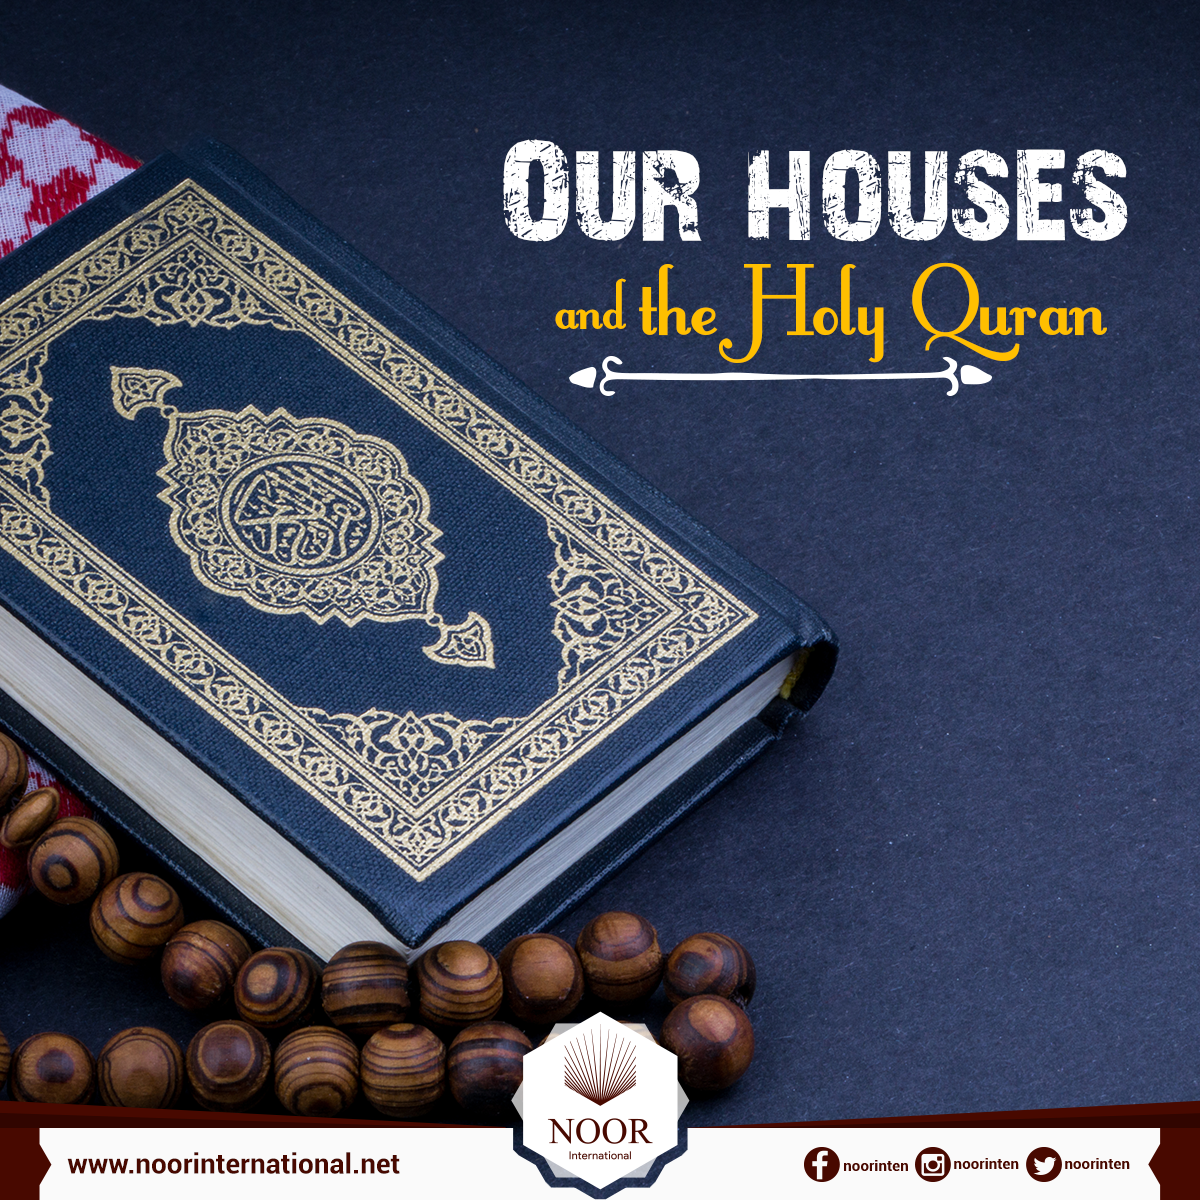 Our houses and the Holy Quran